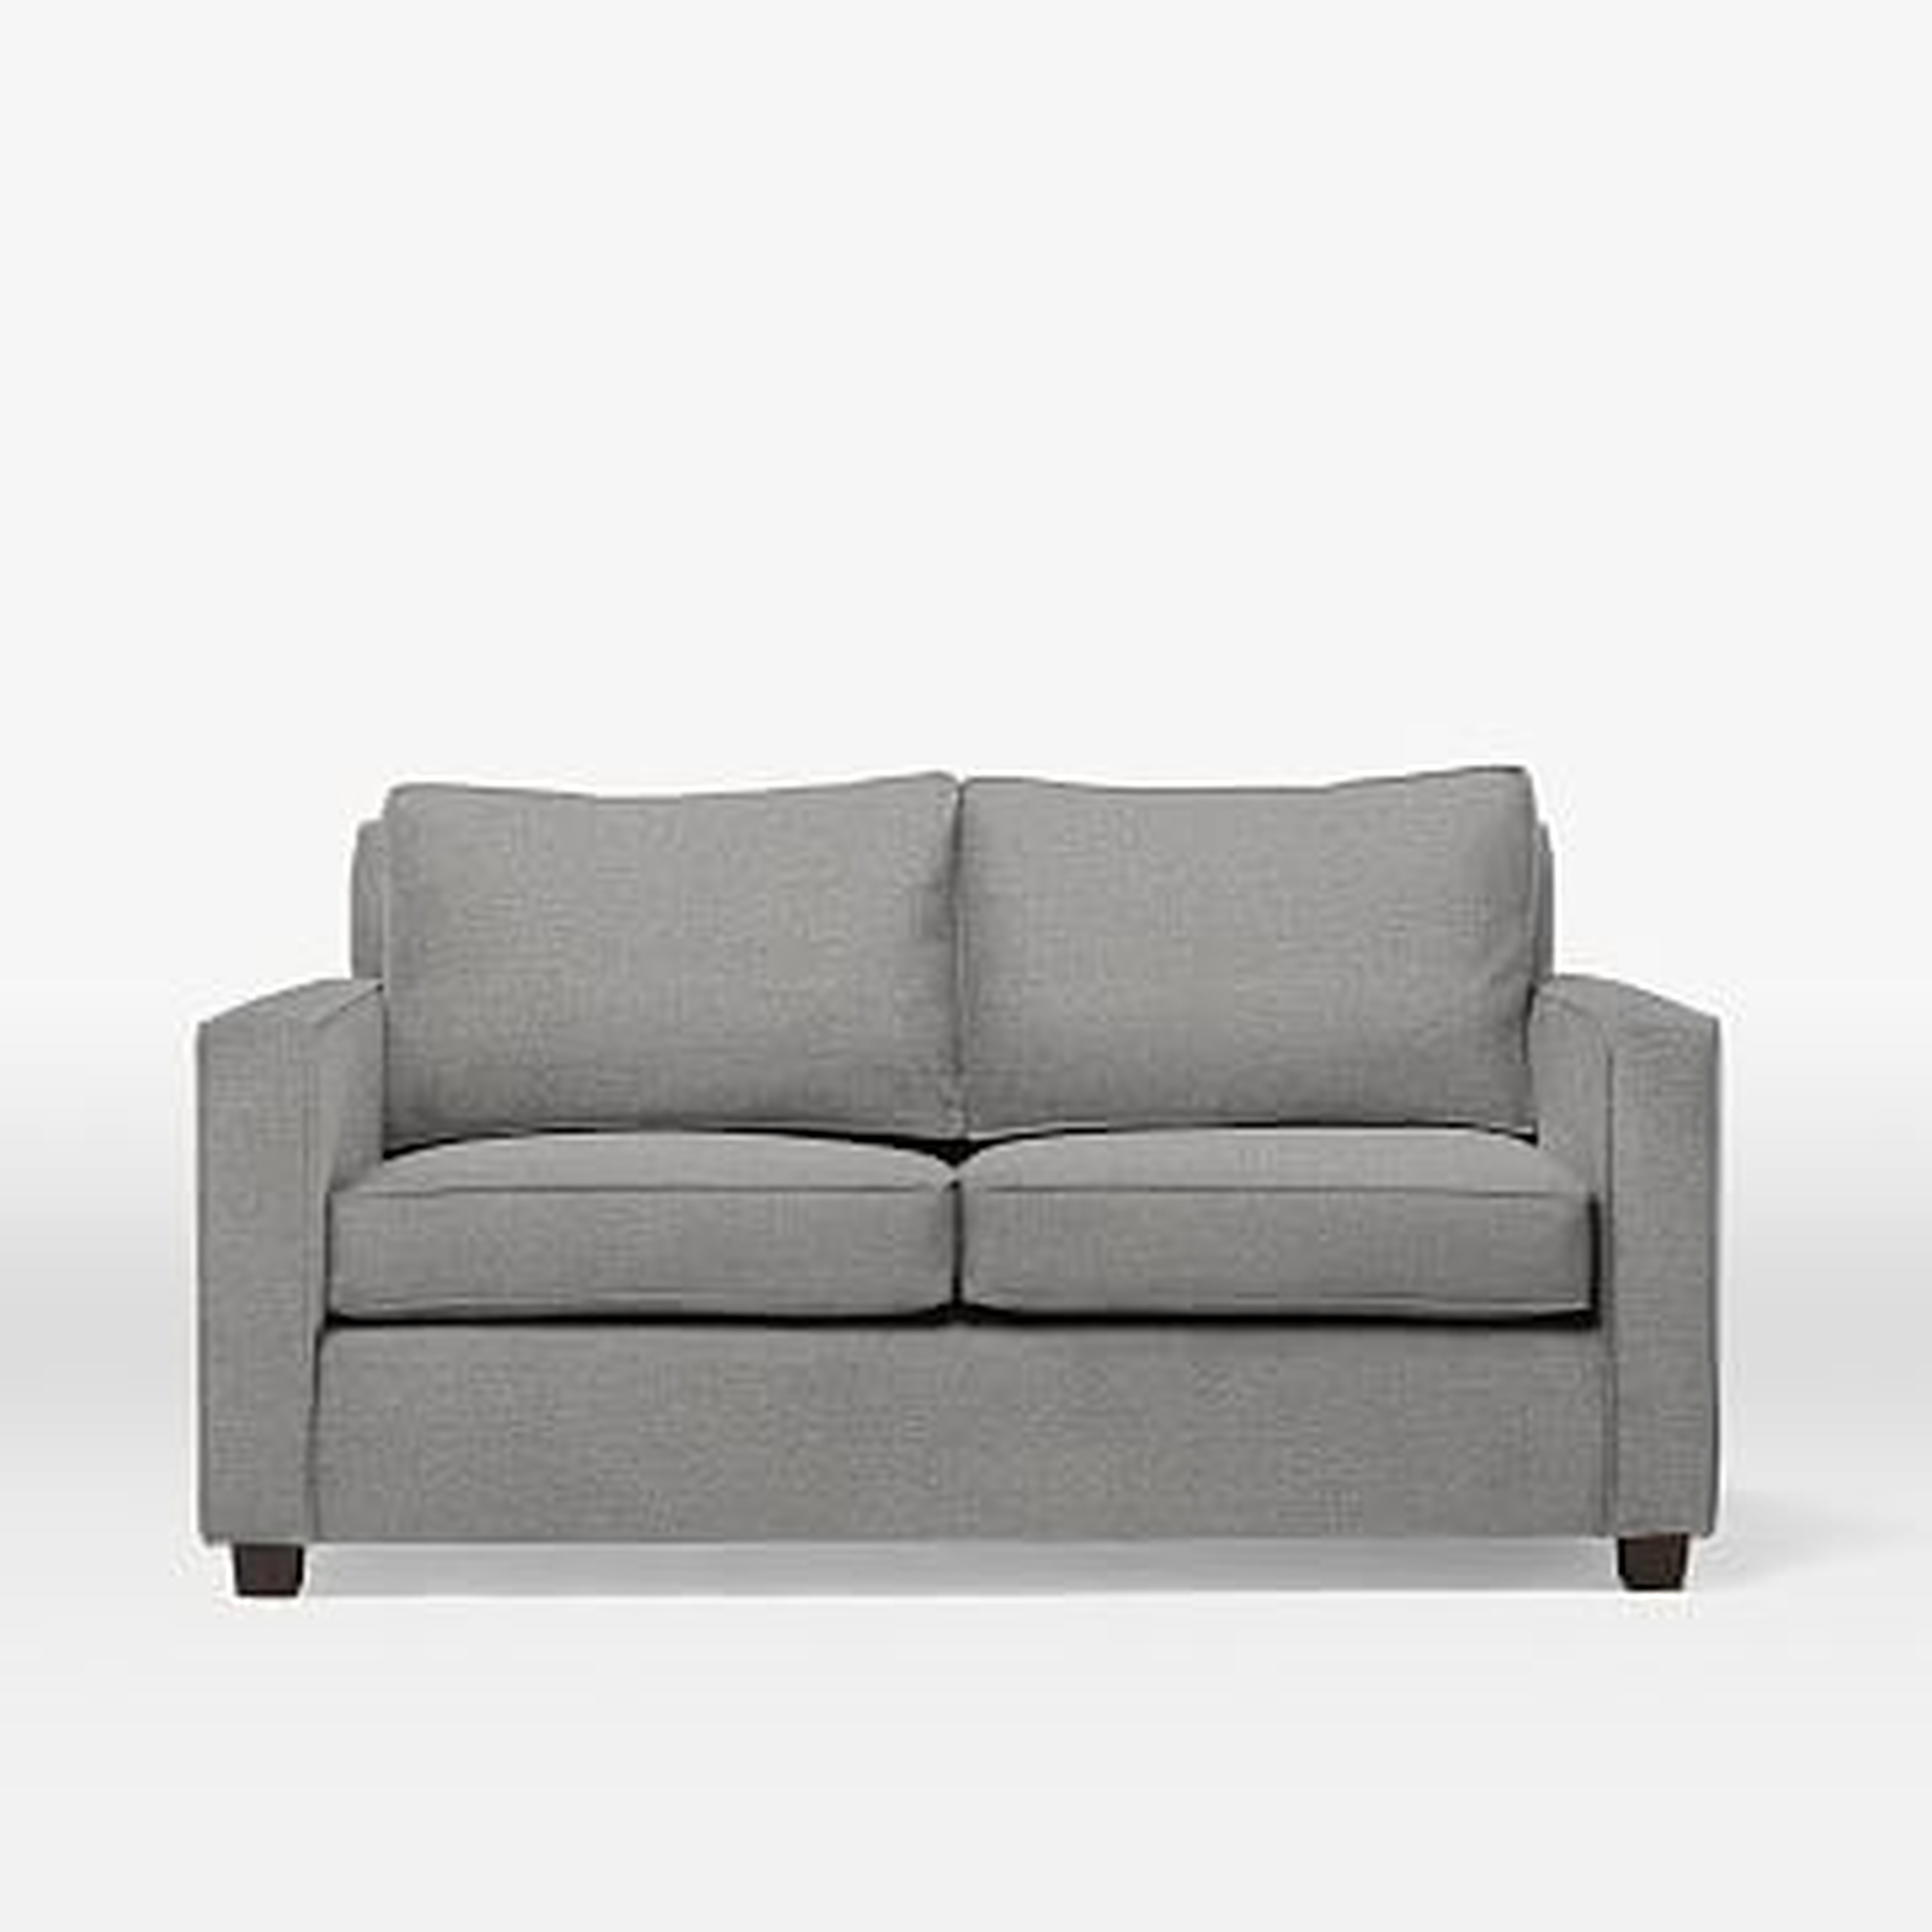 Henry 66" Loveseat, Chenille Tweed, Feather Gray - West Elm